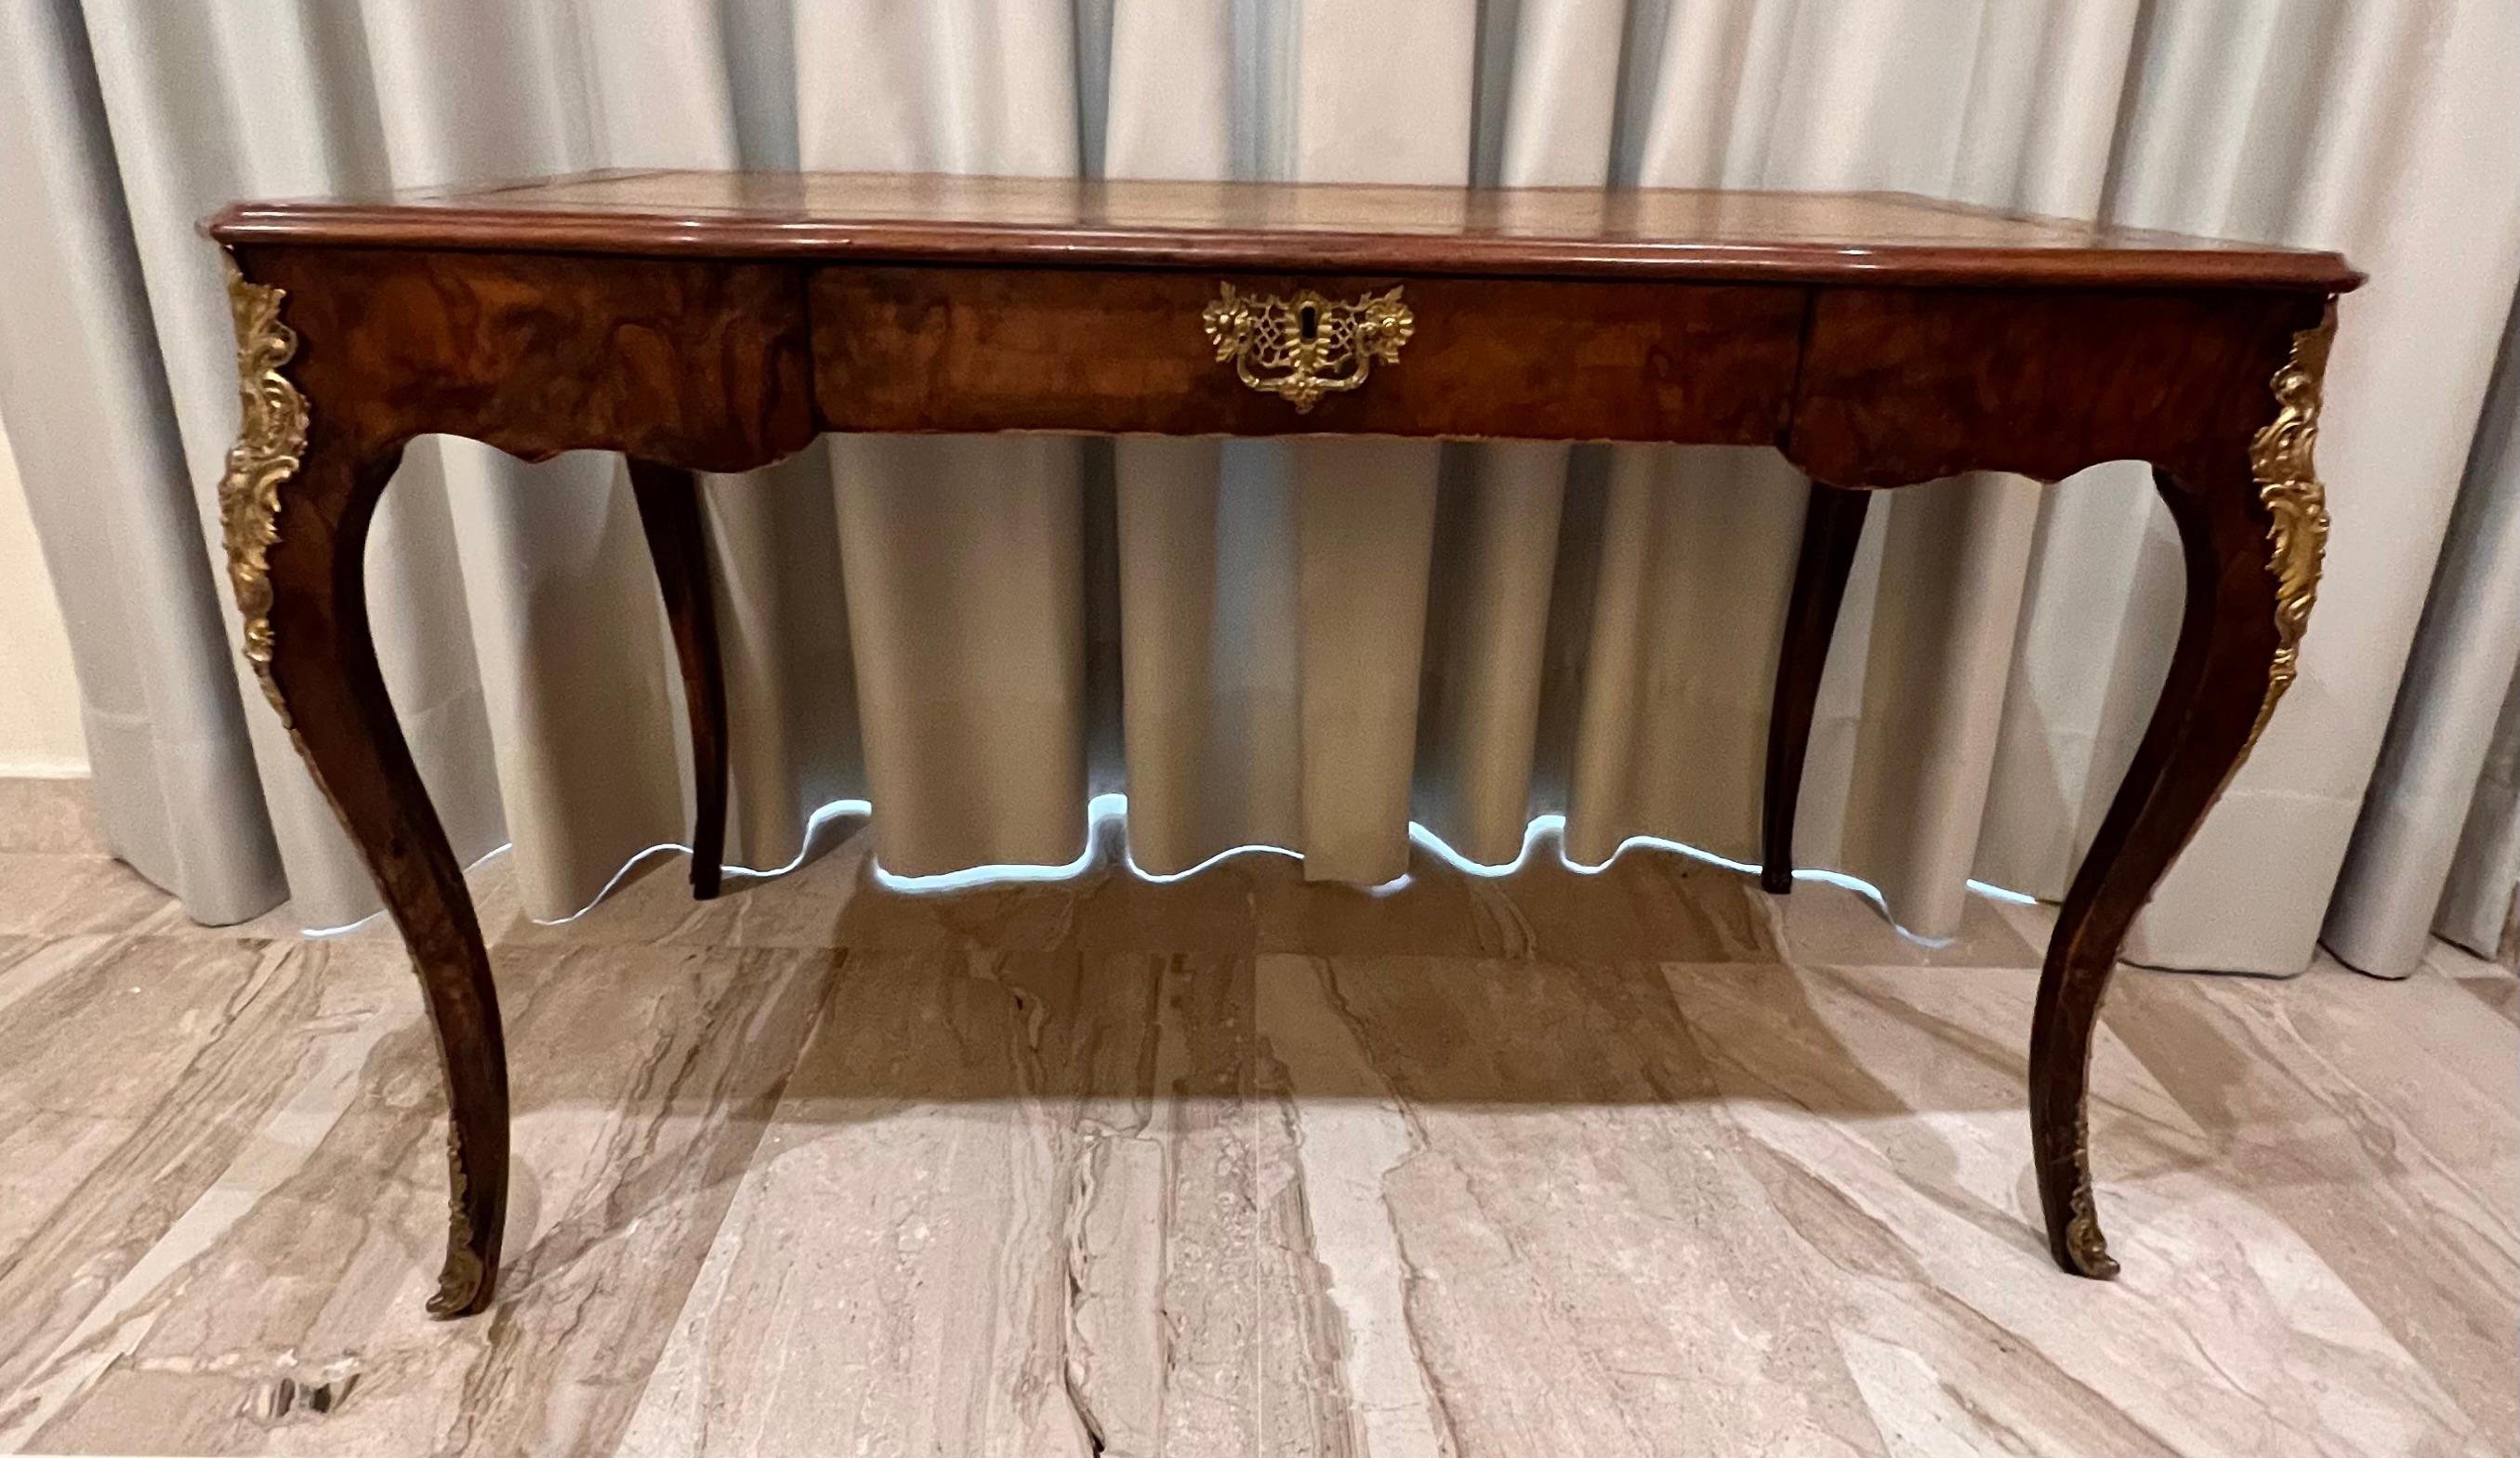 Castle worthy desk, solid wood. Rosewood veneer edged by finely engraved brass fittings. On angled, with four looking forward, imposing curly legs, on all sides scalloped. Profiled and curved writing tablet with real leather, gold embossing. Highly